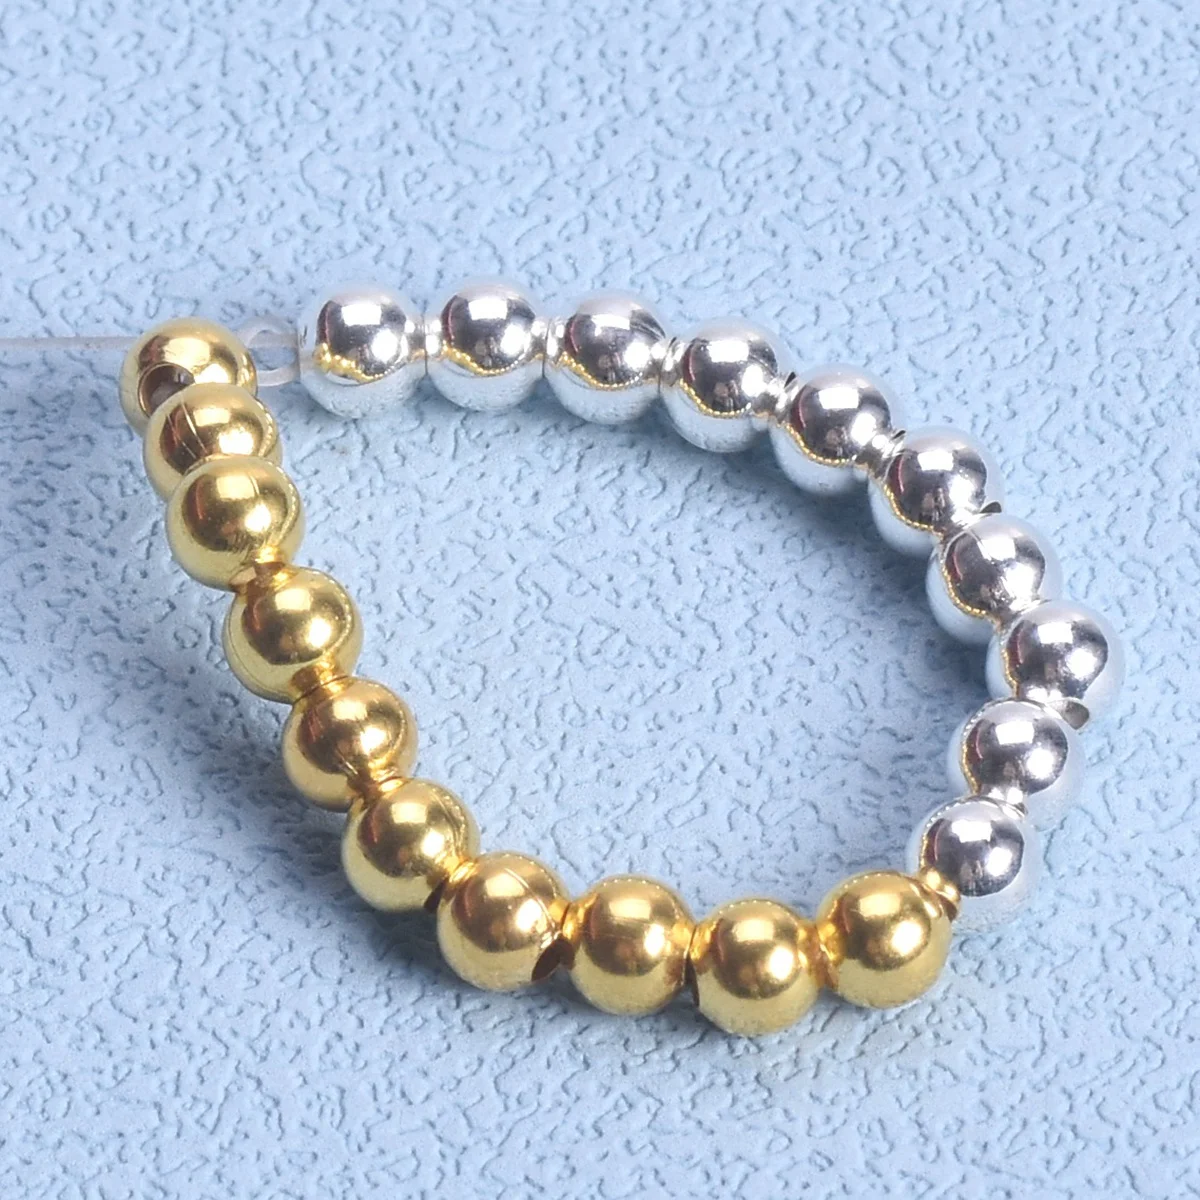 100pcs Small 4mm Round Gold Color Silver Color Metal Alloy Loose Spacer Beads Wholesale Lot For Jewelry Making DIY bracelet halloween skull hollow out alloy bracelet in gold silver size one size